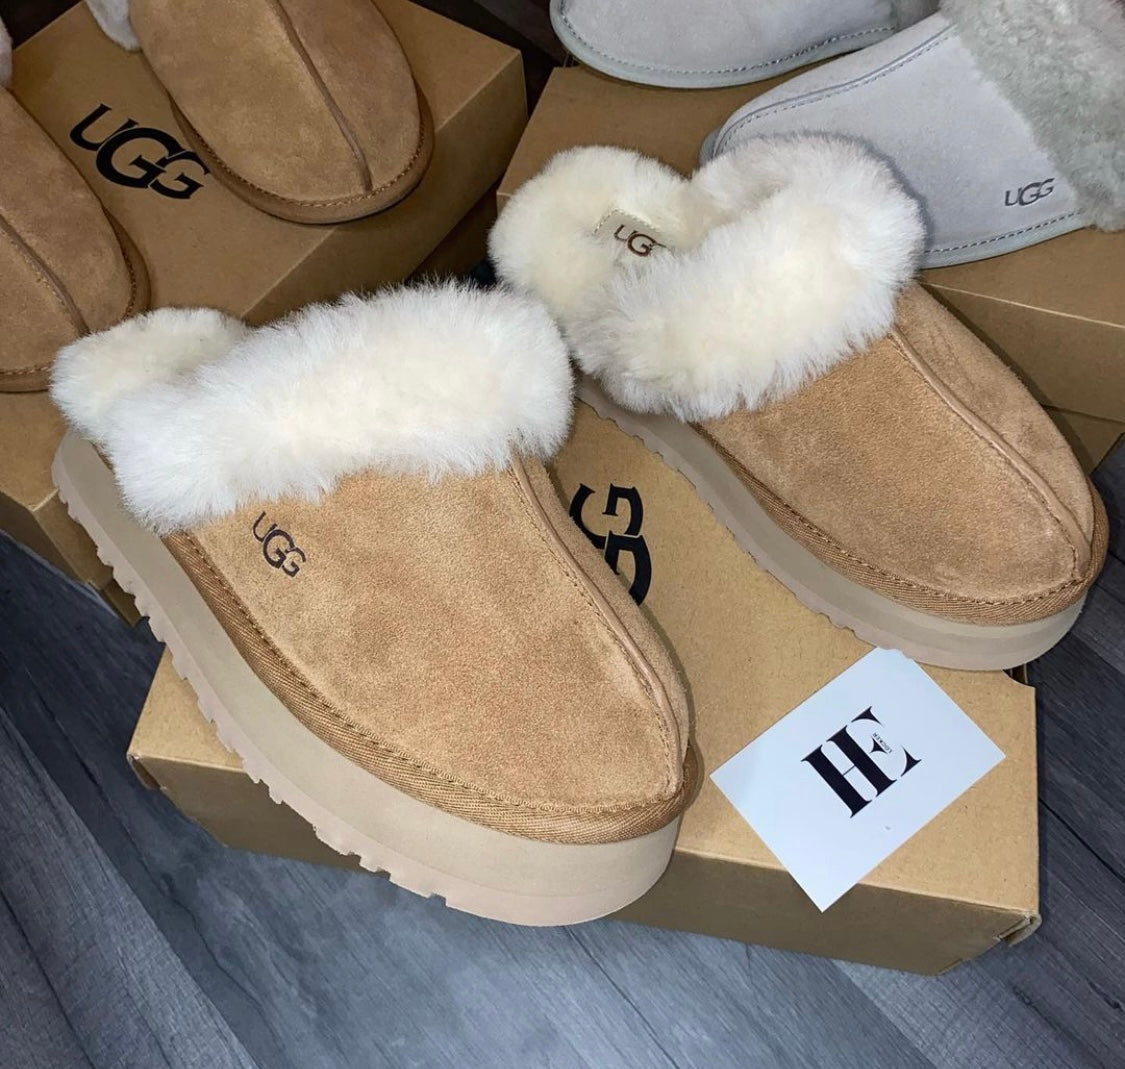 UGG DISQUETTE SLIPPERS